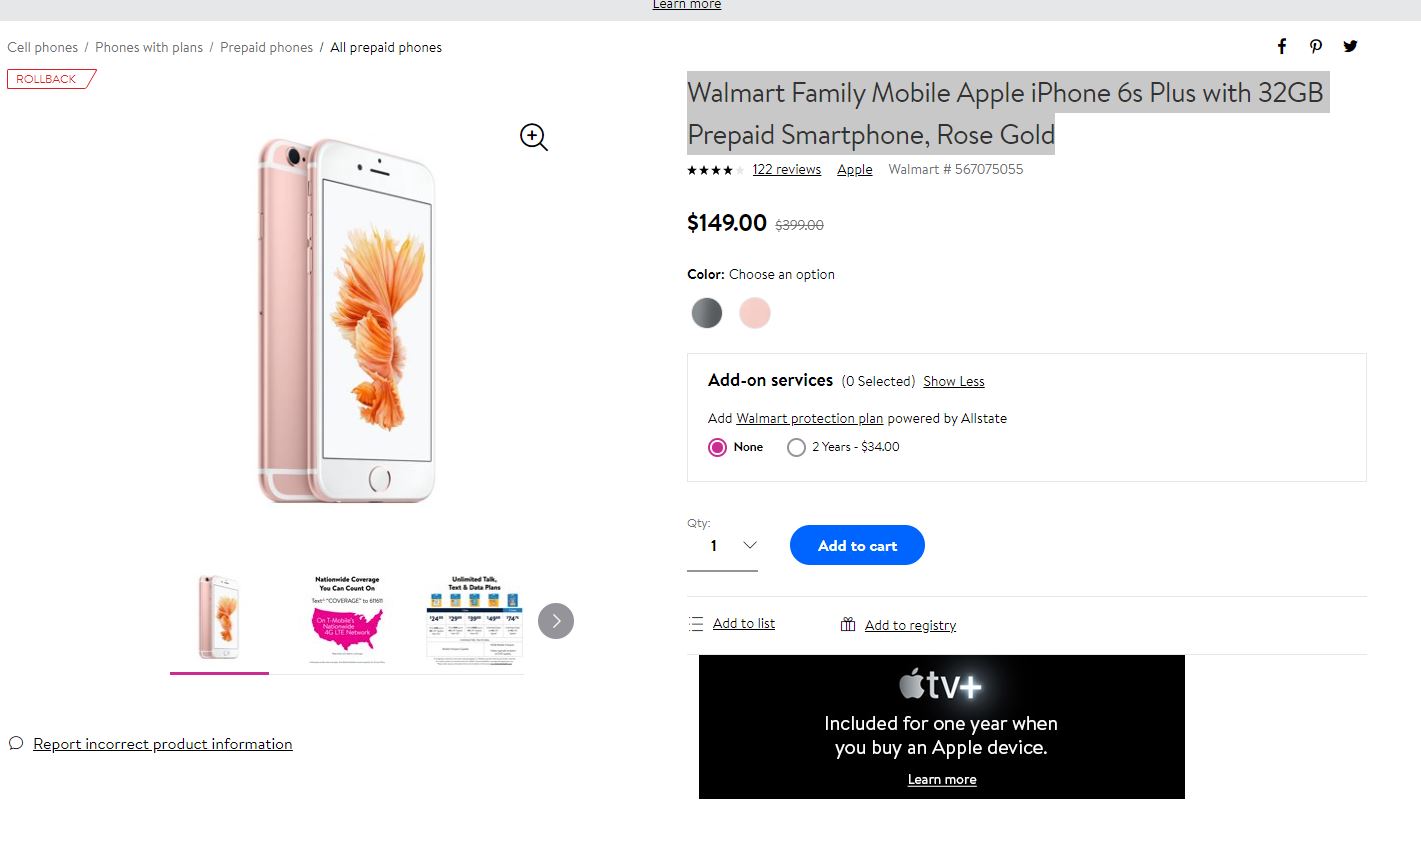 Walmart Family Mobile Apple iPhone 6s Plus with 32GB Prepaid Smartphone, Rose Gold手机